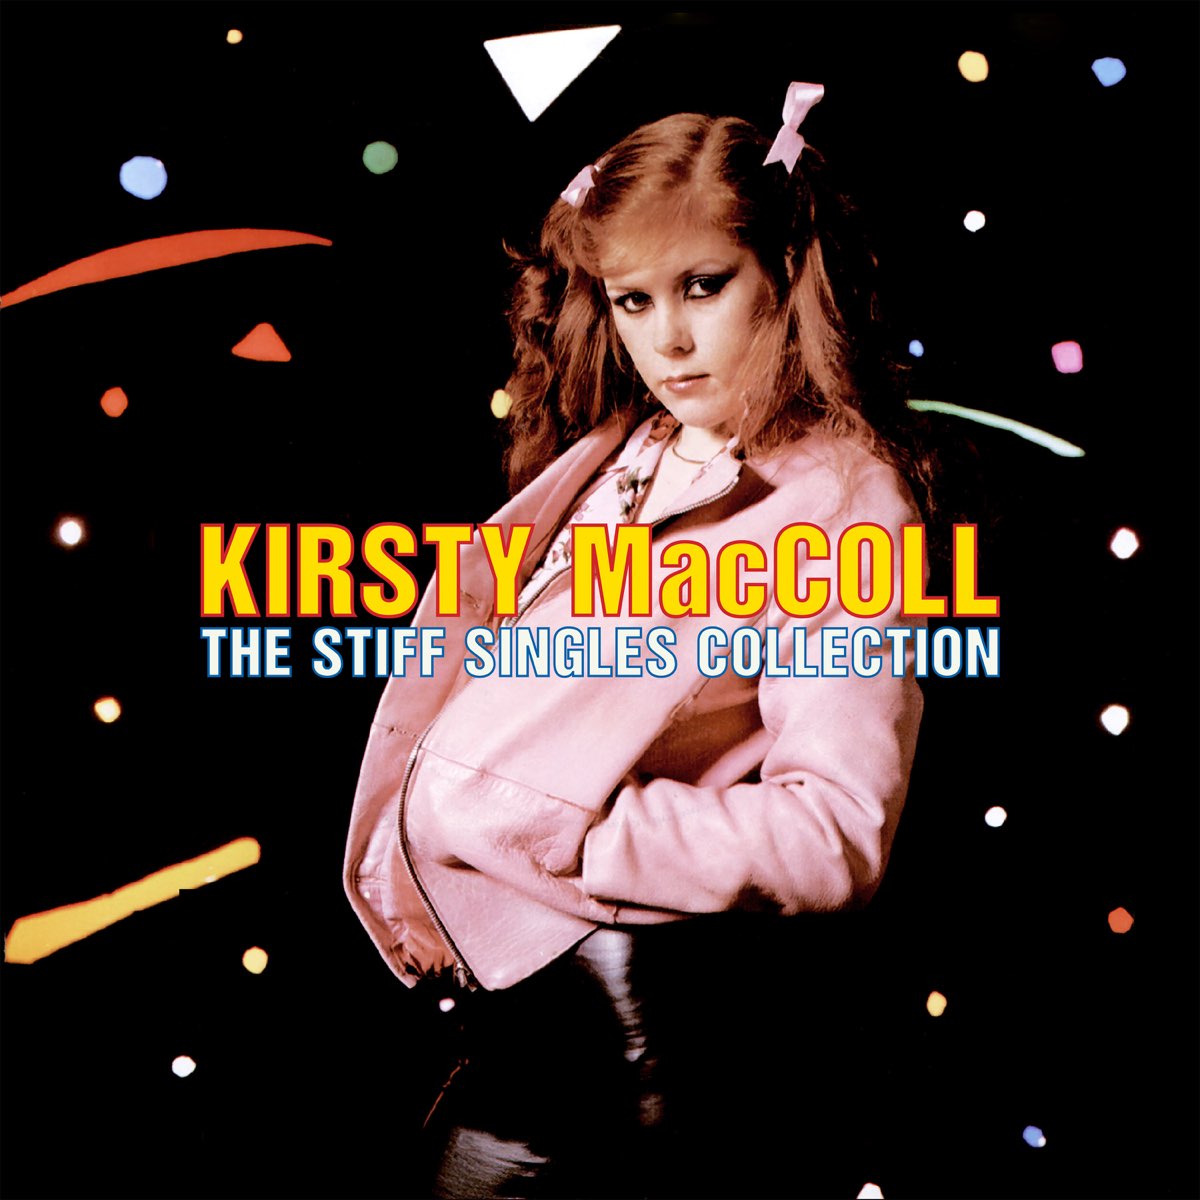 The Stiff Singles Collection by Kirsty MacColl on Apple Music